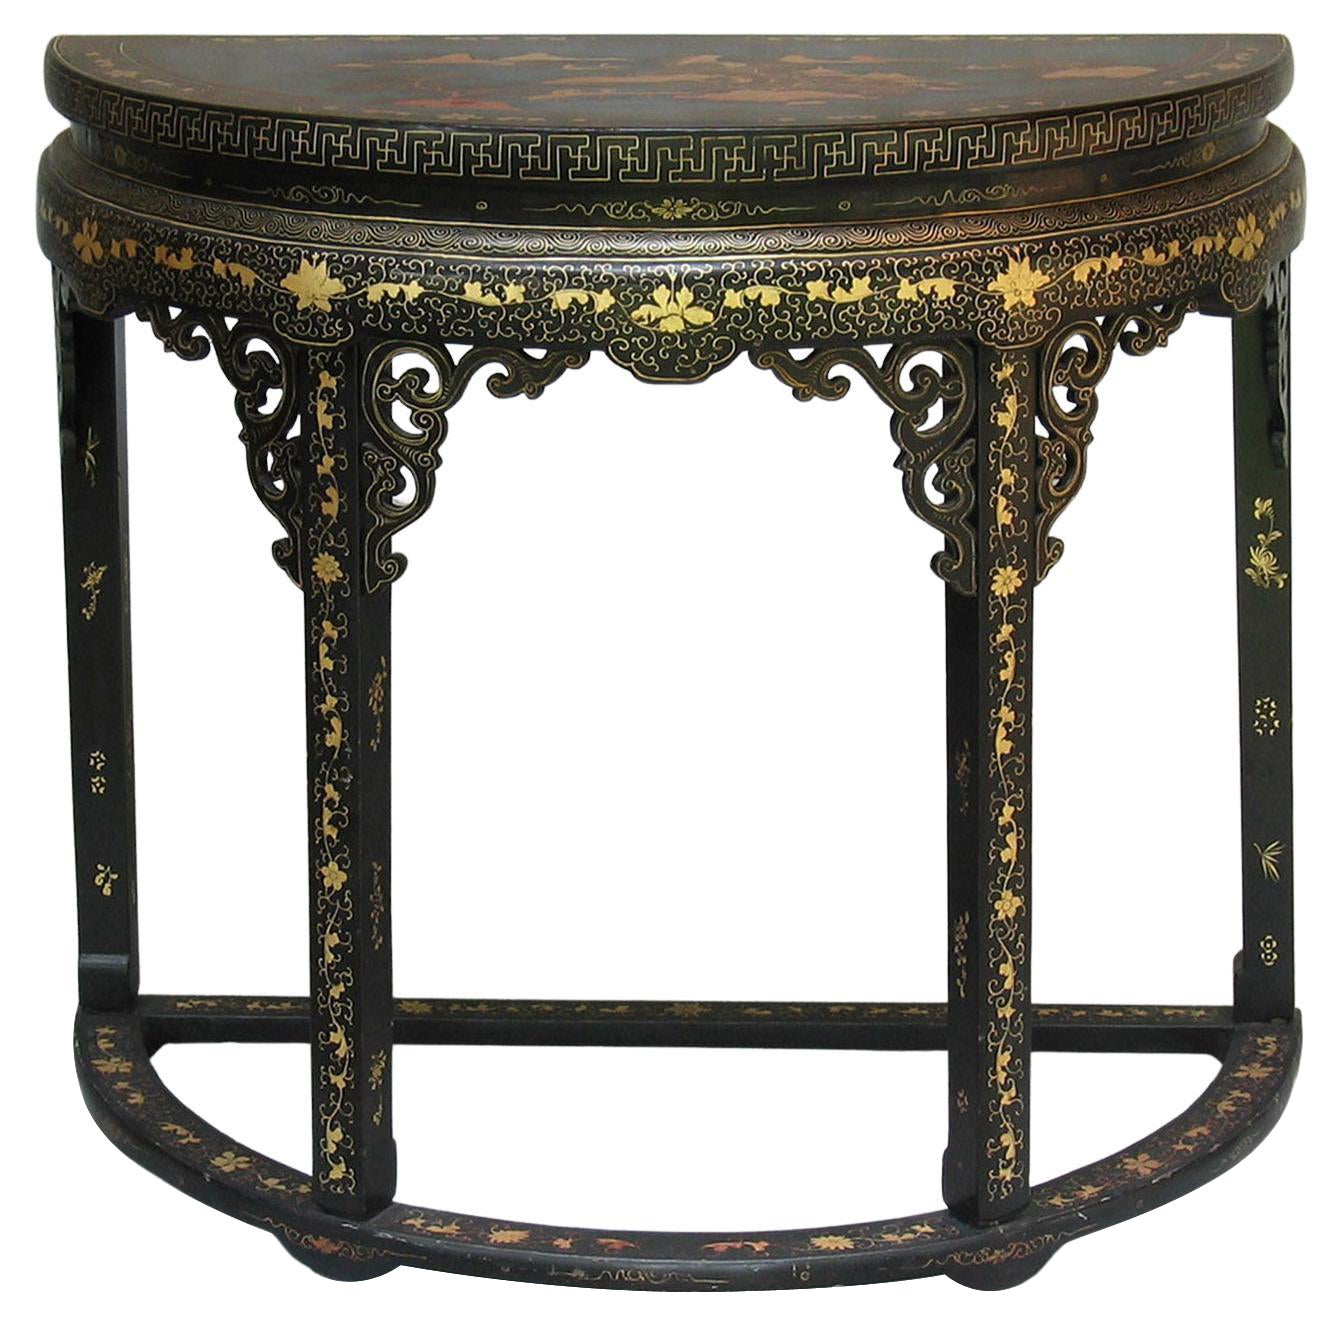 Chinese Export Gilt Lacquer Decorated Demi-lune Console Table Early 19th Century